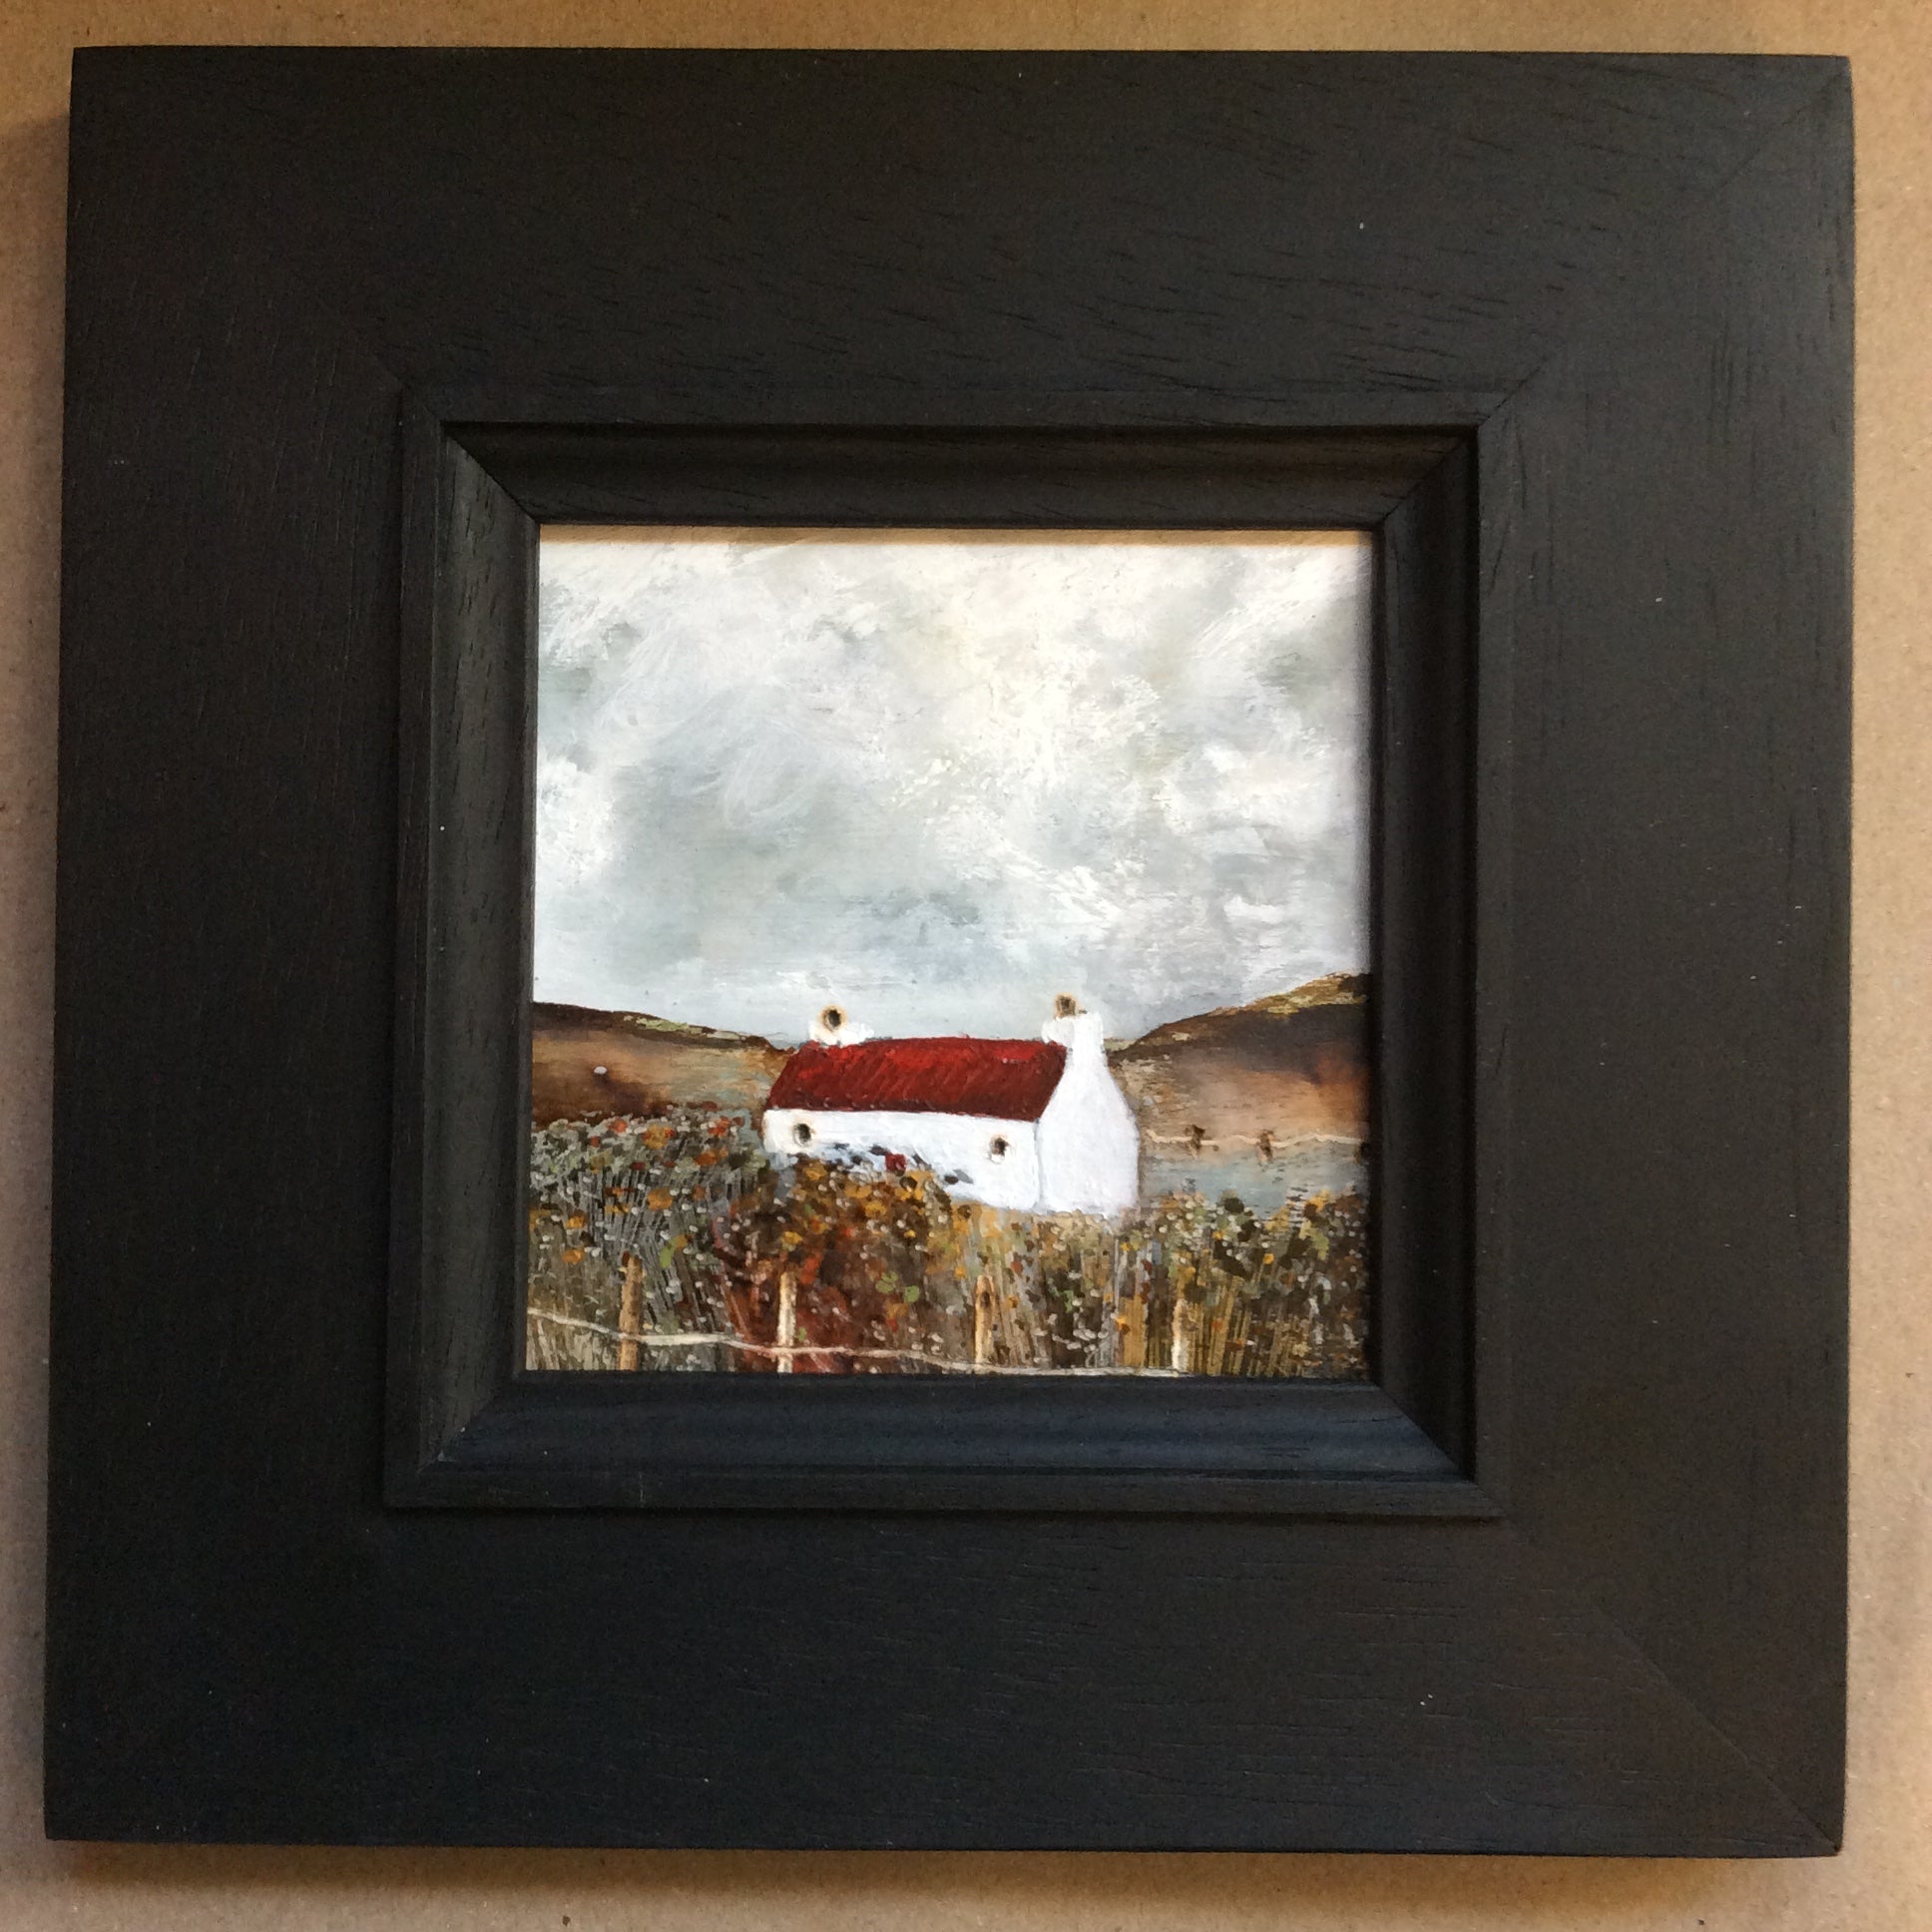 Copy of Mixed Media  art on wood By Louise O’Hara “Red Roof Croft House”